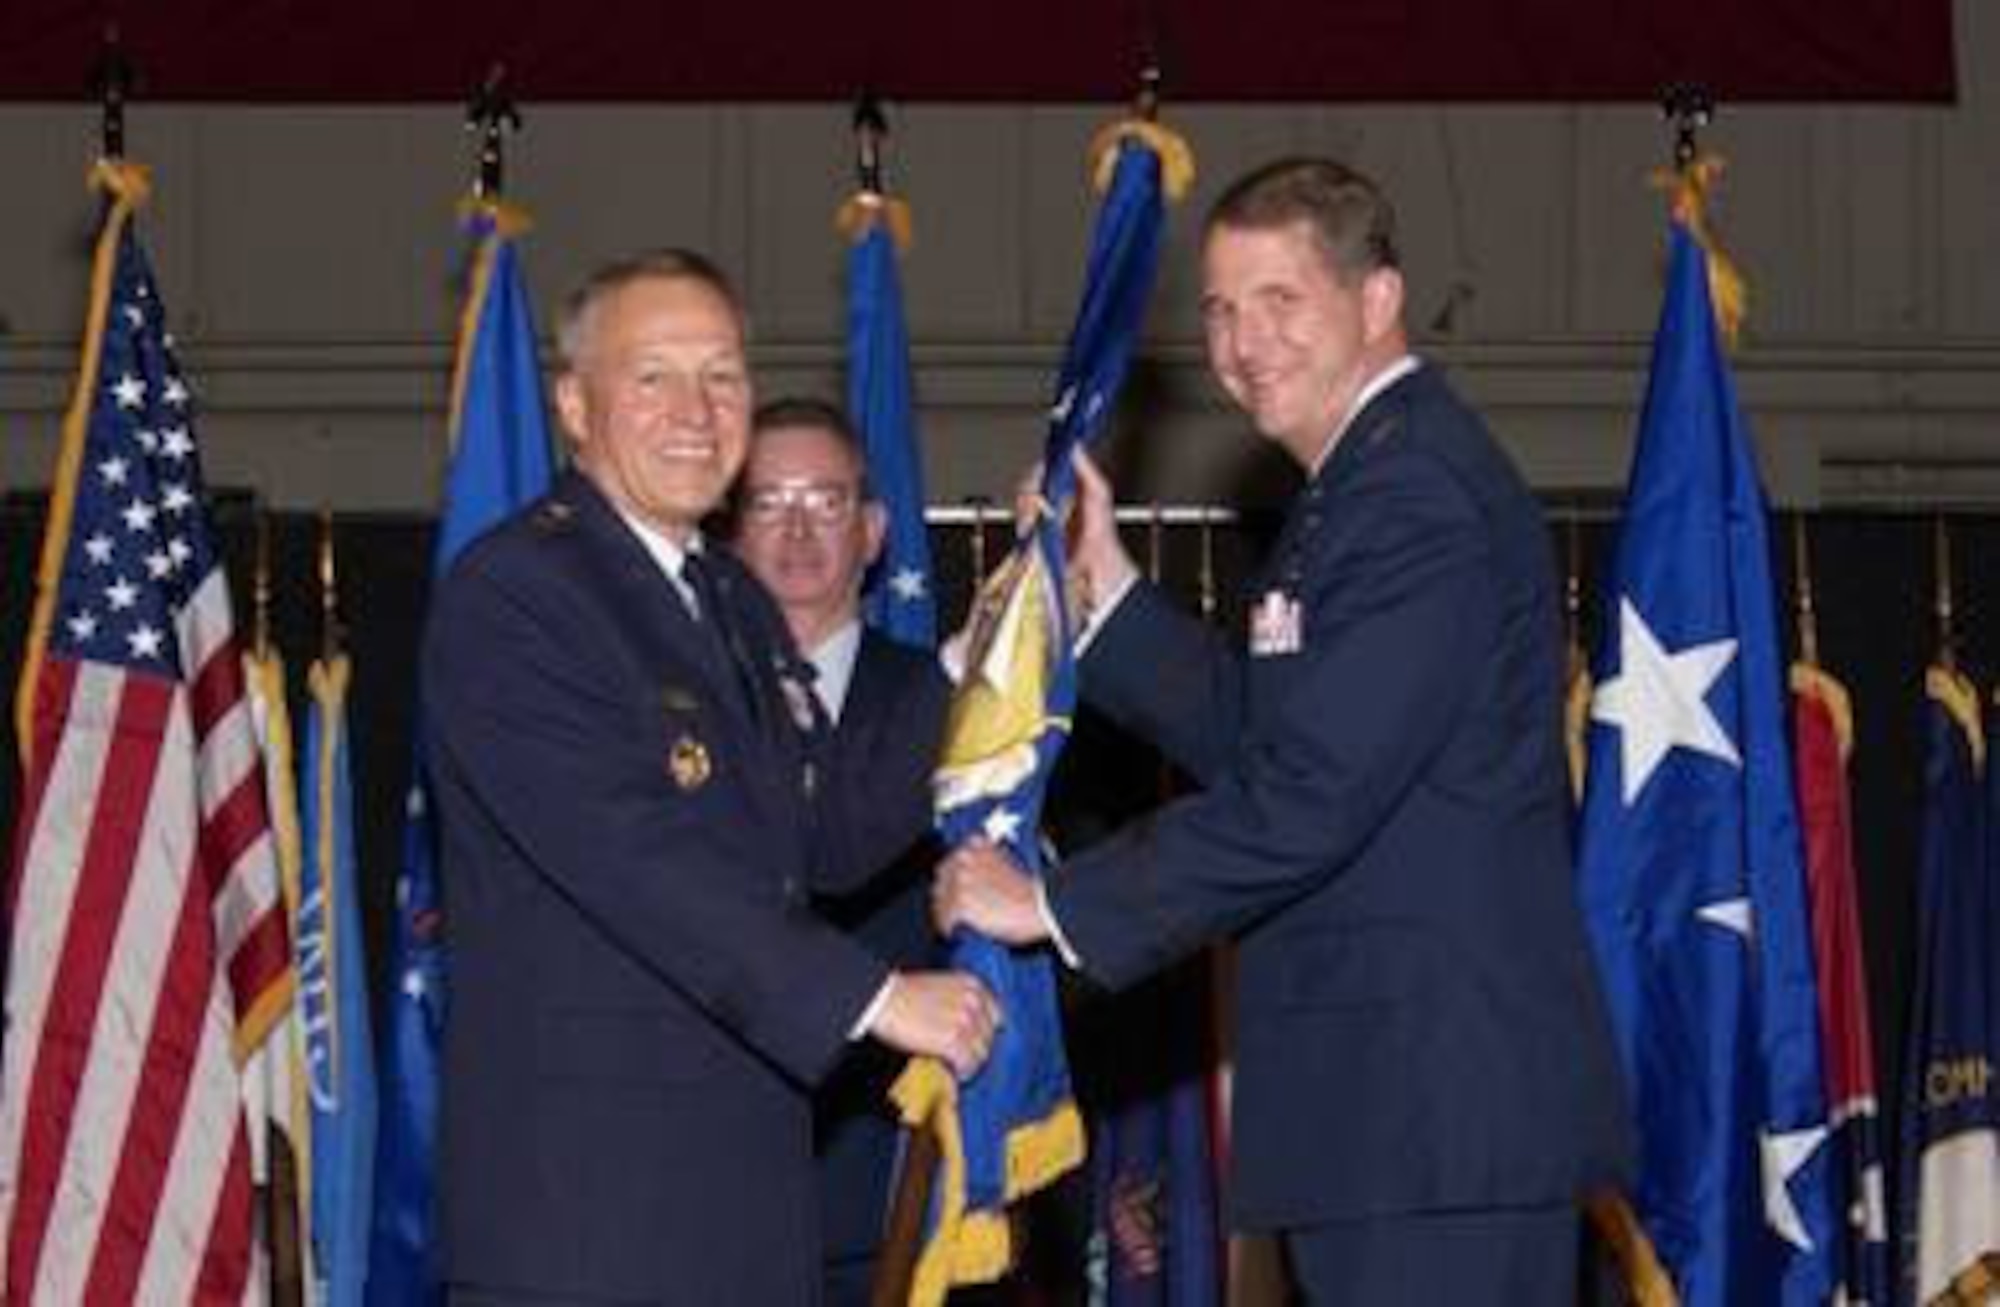 Gen. Bruce Carlson, commander, Air Force Materiel Command, passes the flag to Maj. Gen. Ted Bowlds, during the Air Force Research Laboratory Appointment of Command ceremony Jan. 9 at the National Museum of the U.S. Air Force, Dayton, Ohio.    (Air Force photo by Marvin Baumgarter)

